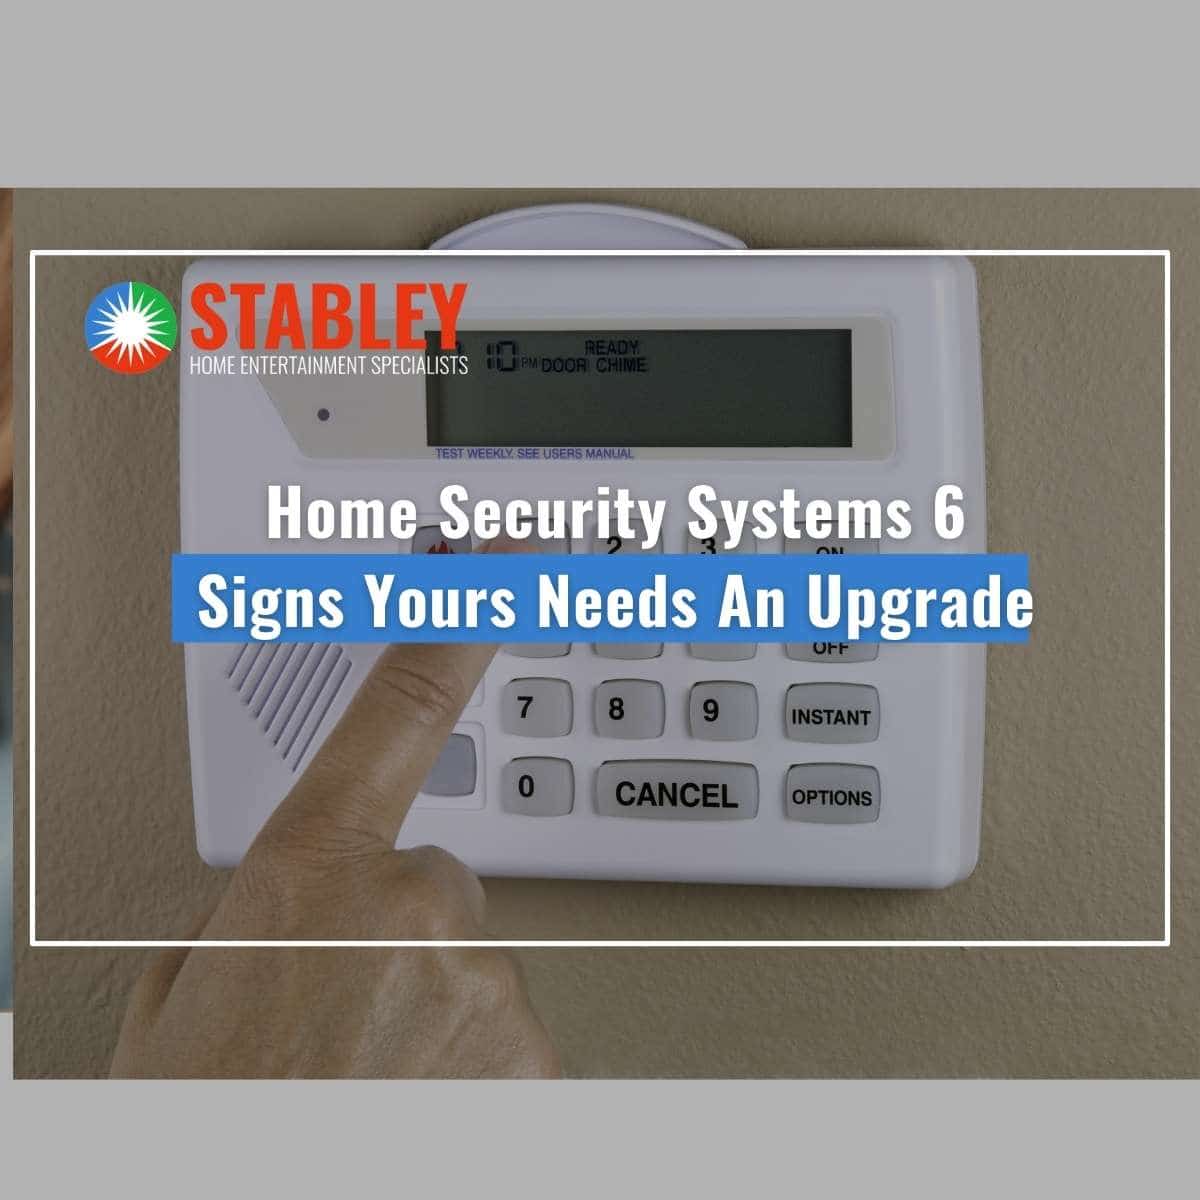 Home Security Systems 6 Signs Yours Needs An Upgrade